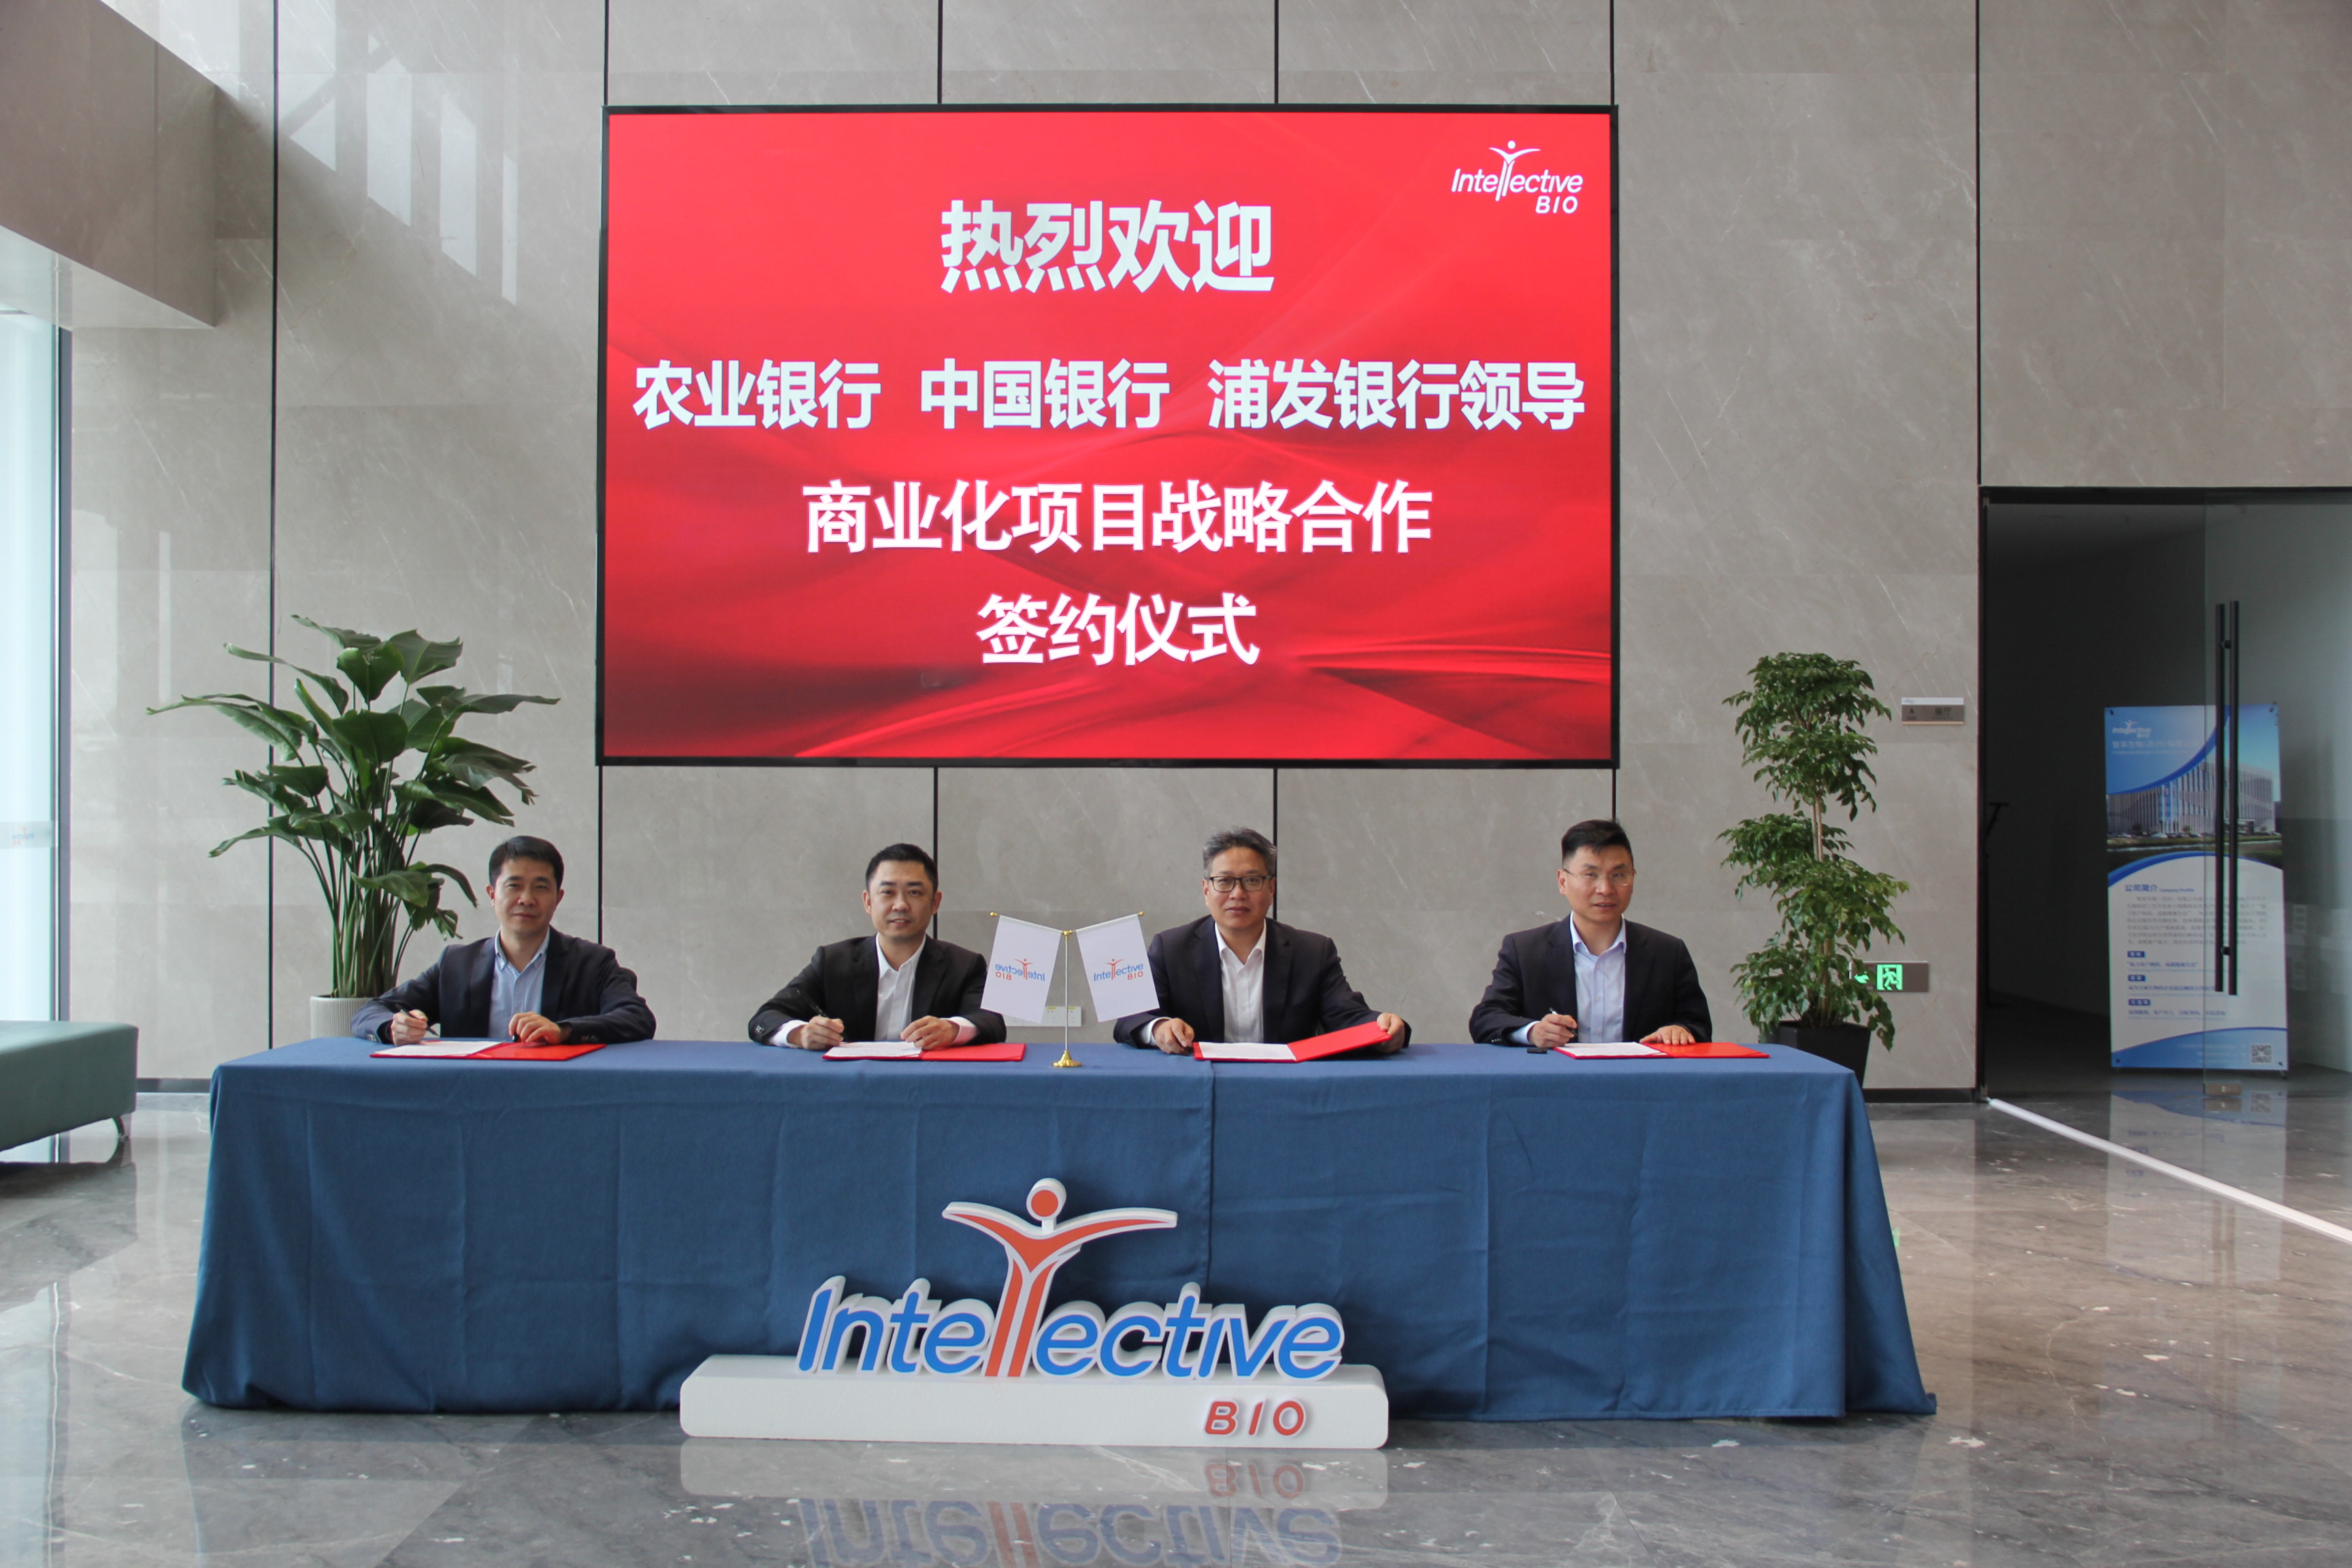 Intellective Bio has reached a strategic cooperation with the three major commercial banks